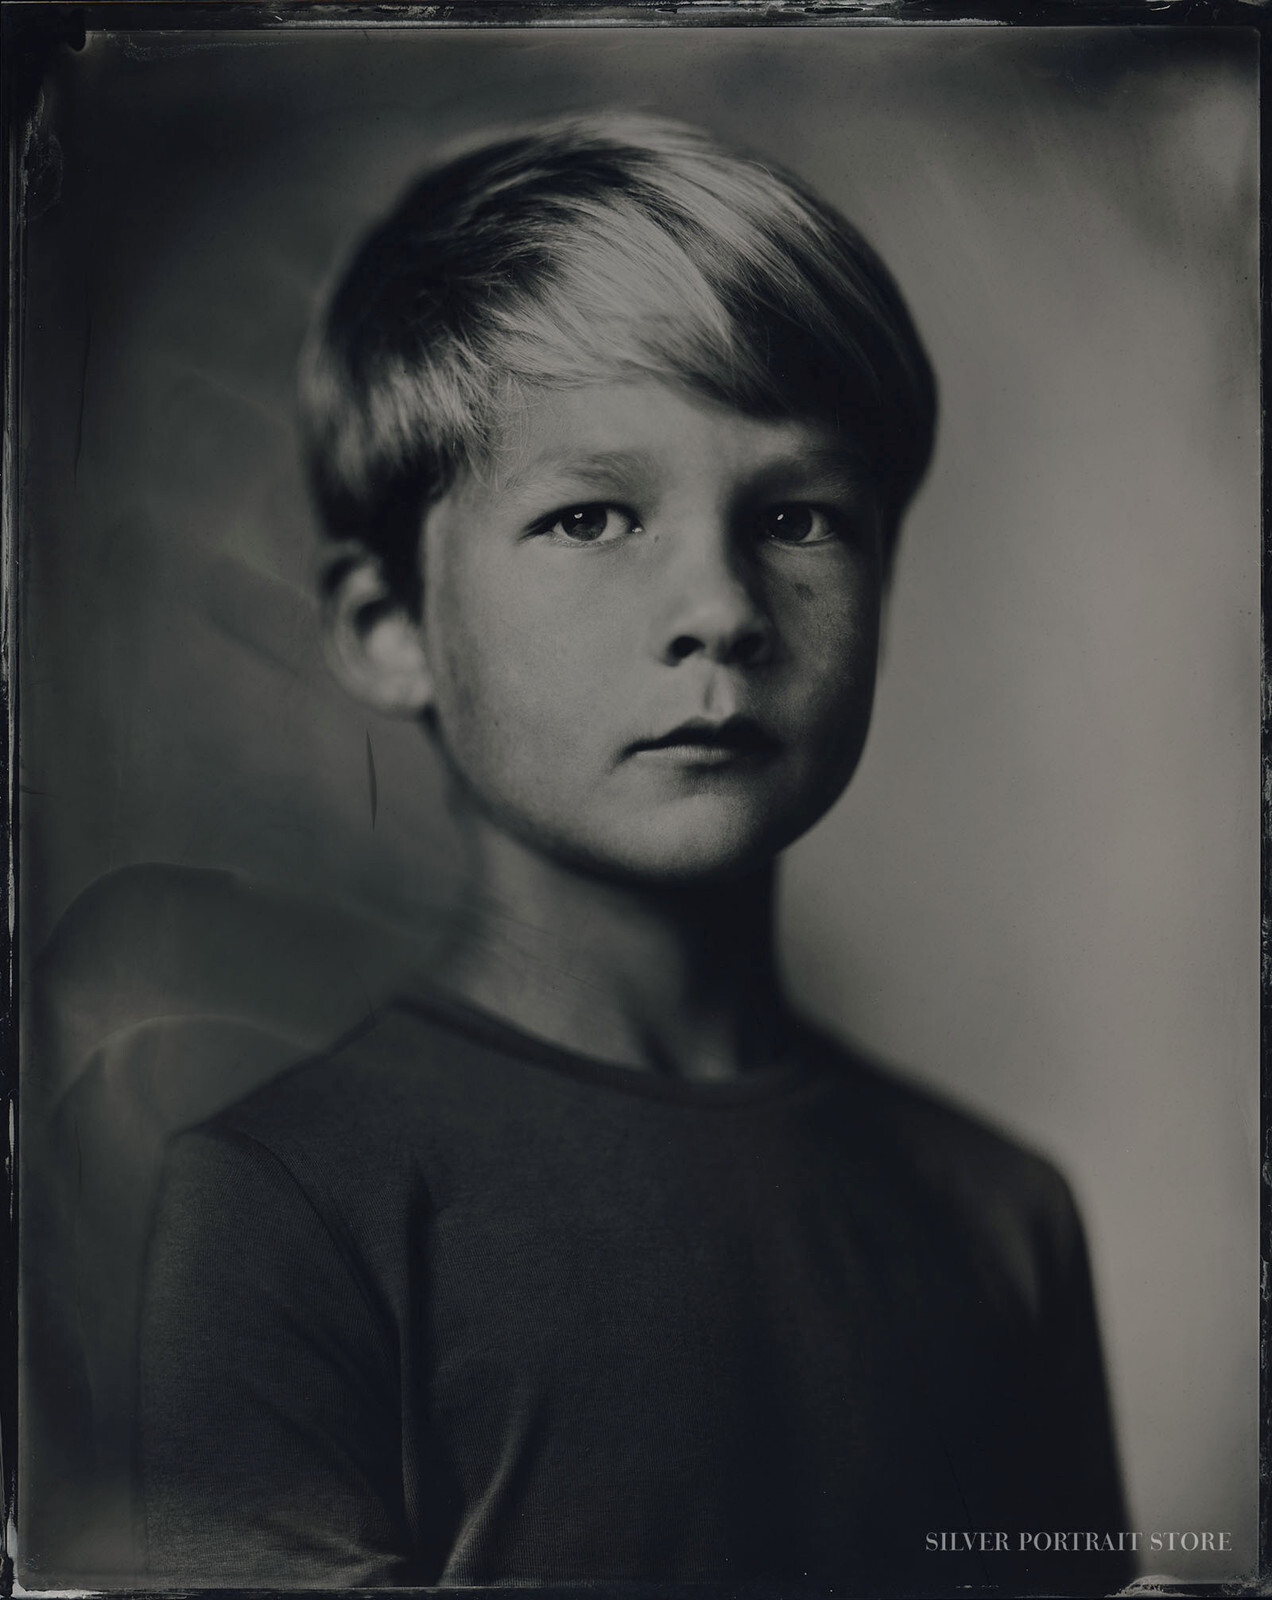 Imme-Silver Portrait Store-scan from Wet plate collodion-Tintype 20 x 25 cm.